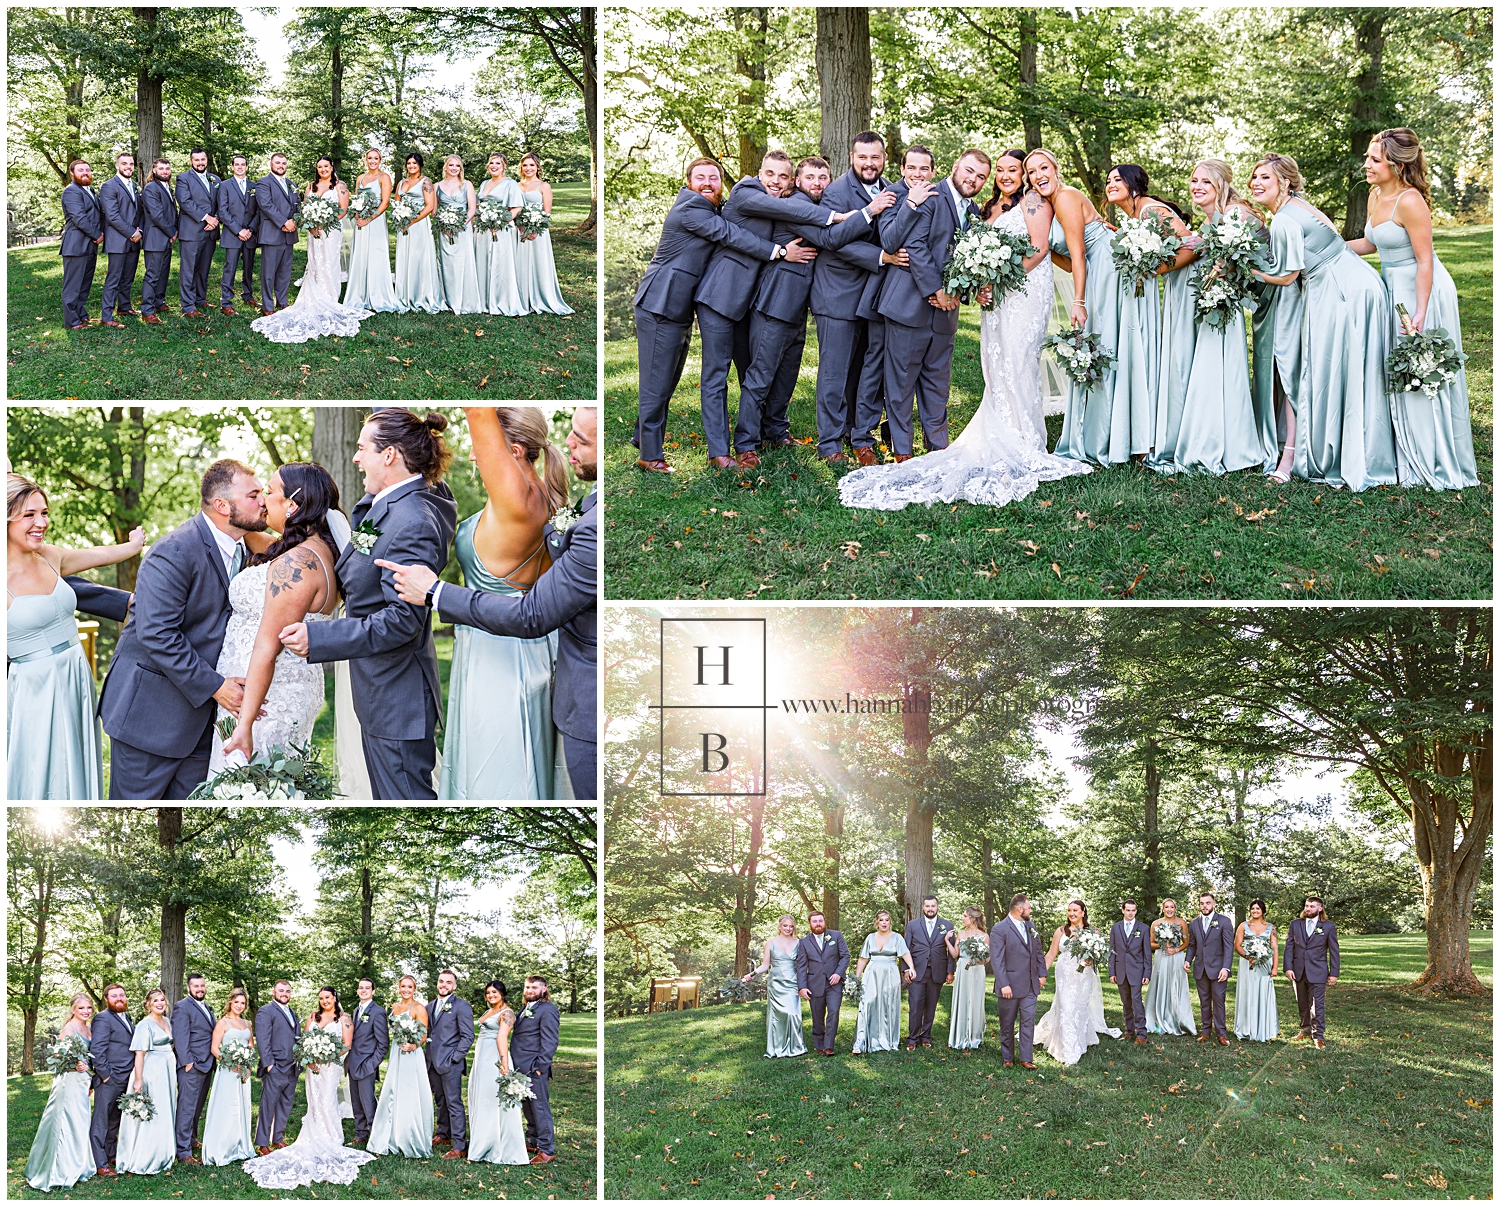 Bridal Party Photos in Forest with Sunlight Behind